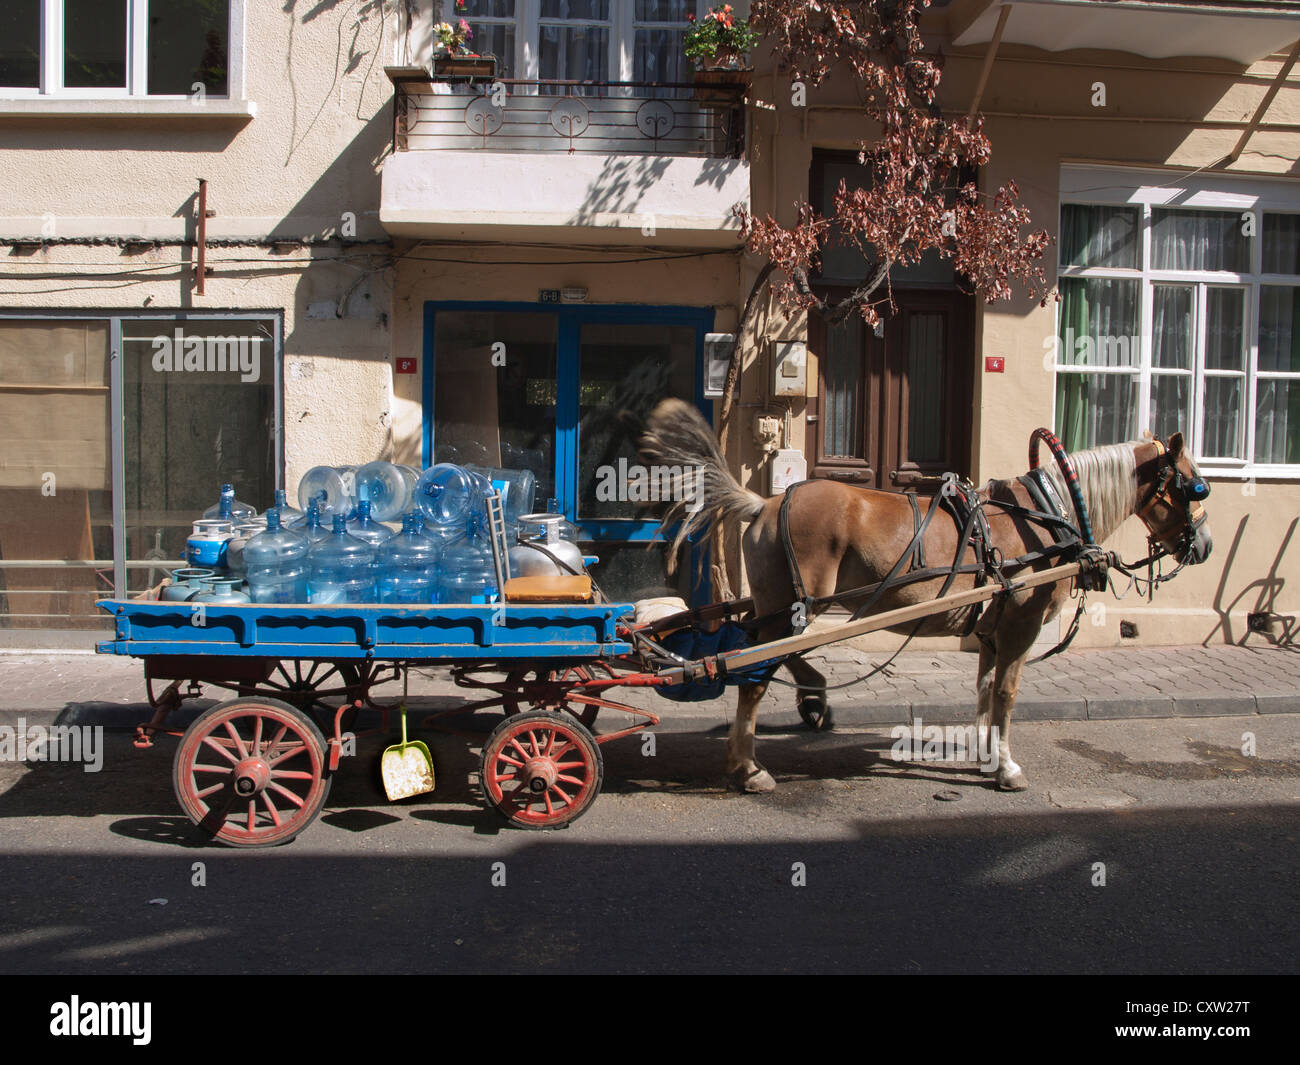 Horse drawn wagon / cart for goods transportation in Buyukada Turkey filled with fresh water tanks Stock Photo